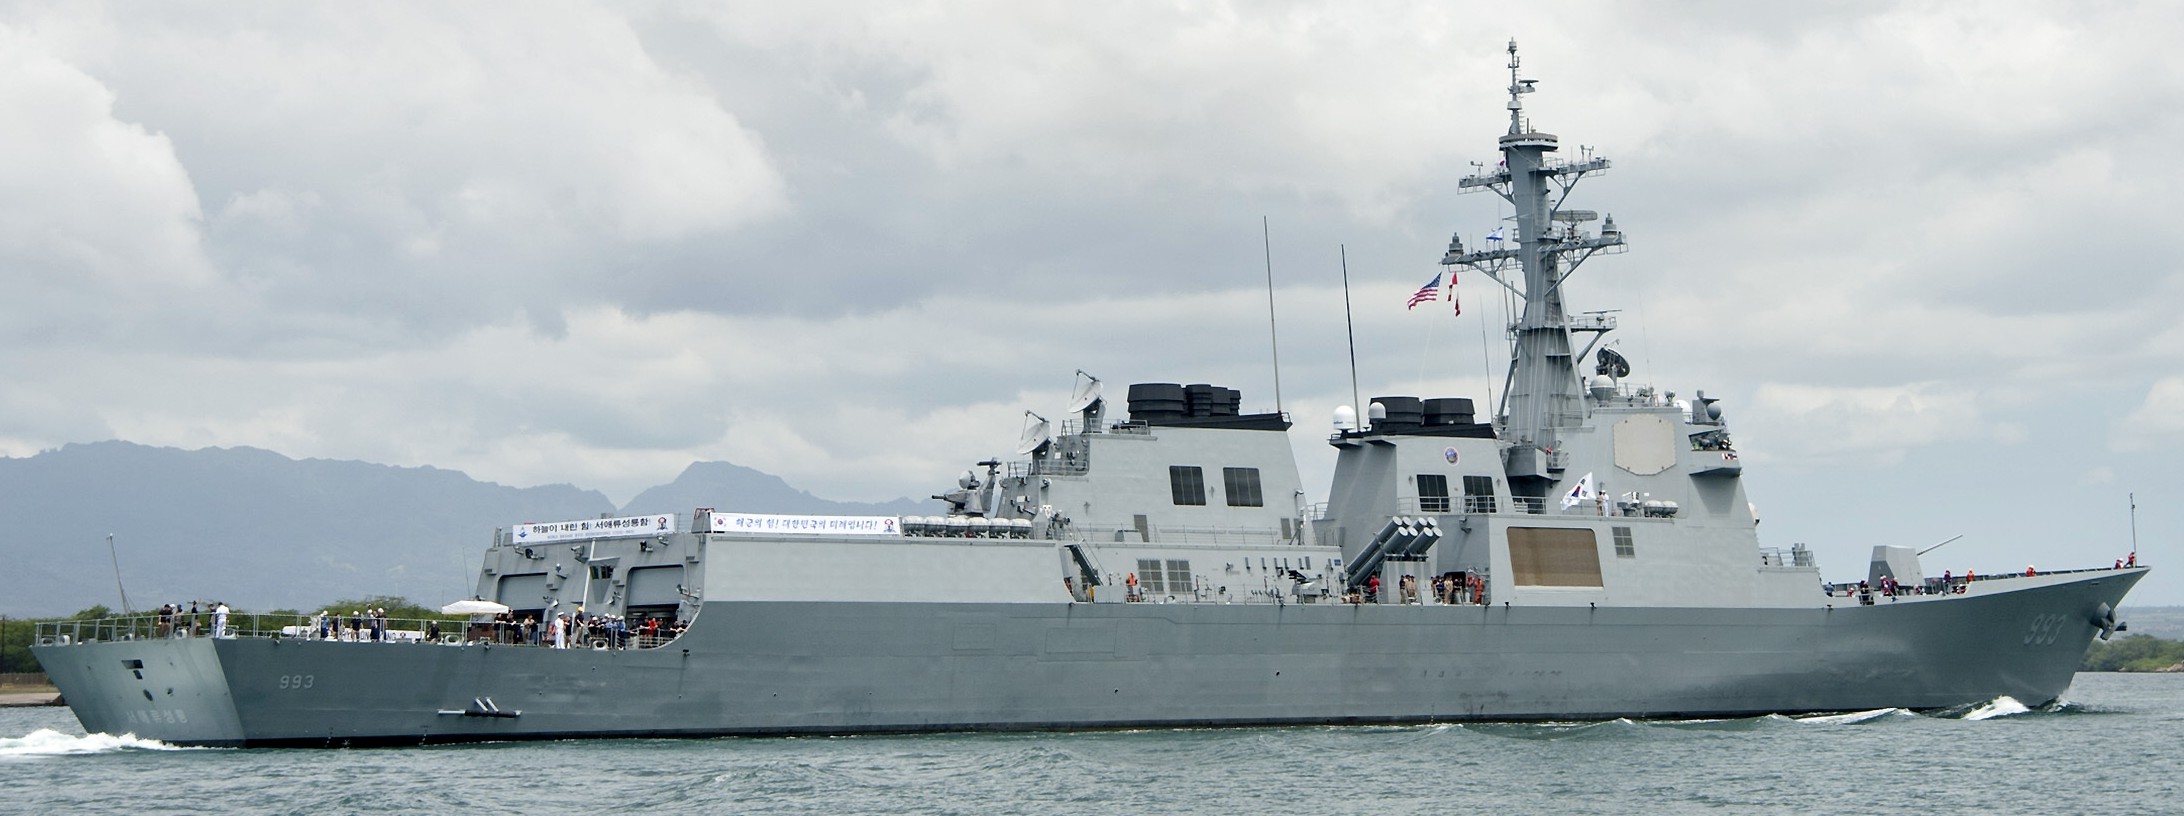 ddg-993 roks seoae ryu seong-ryong sejong the great class guided missile destroyer aegis republic of korea navy rokn 14